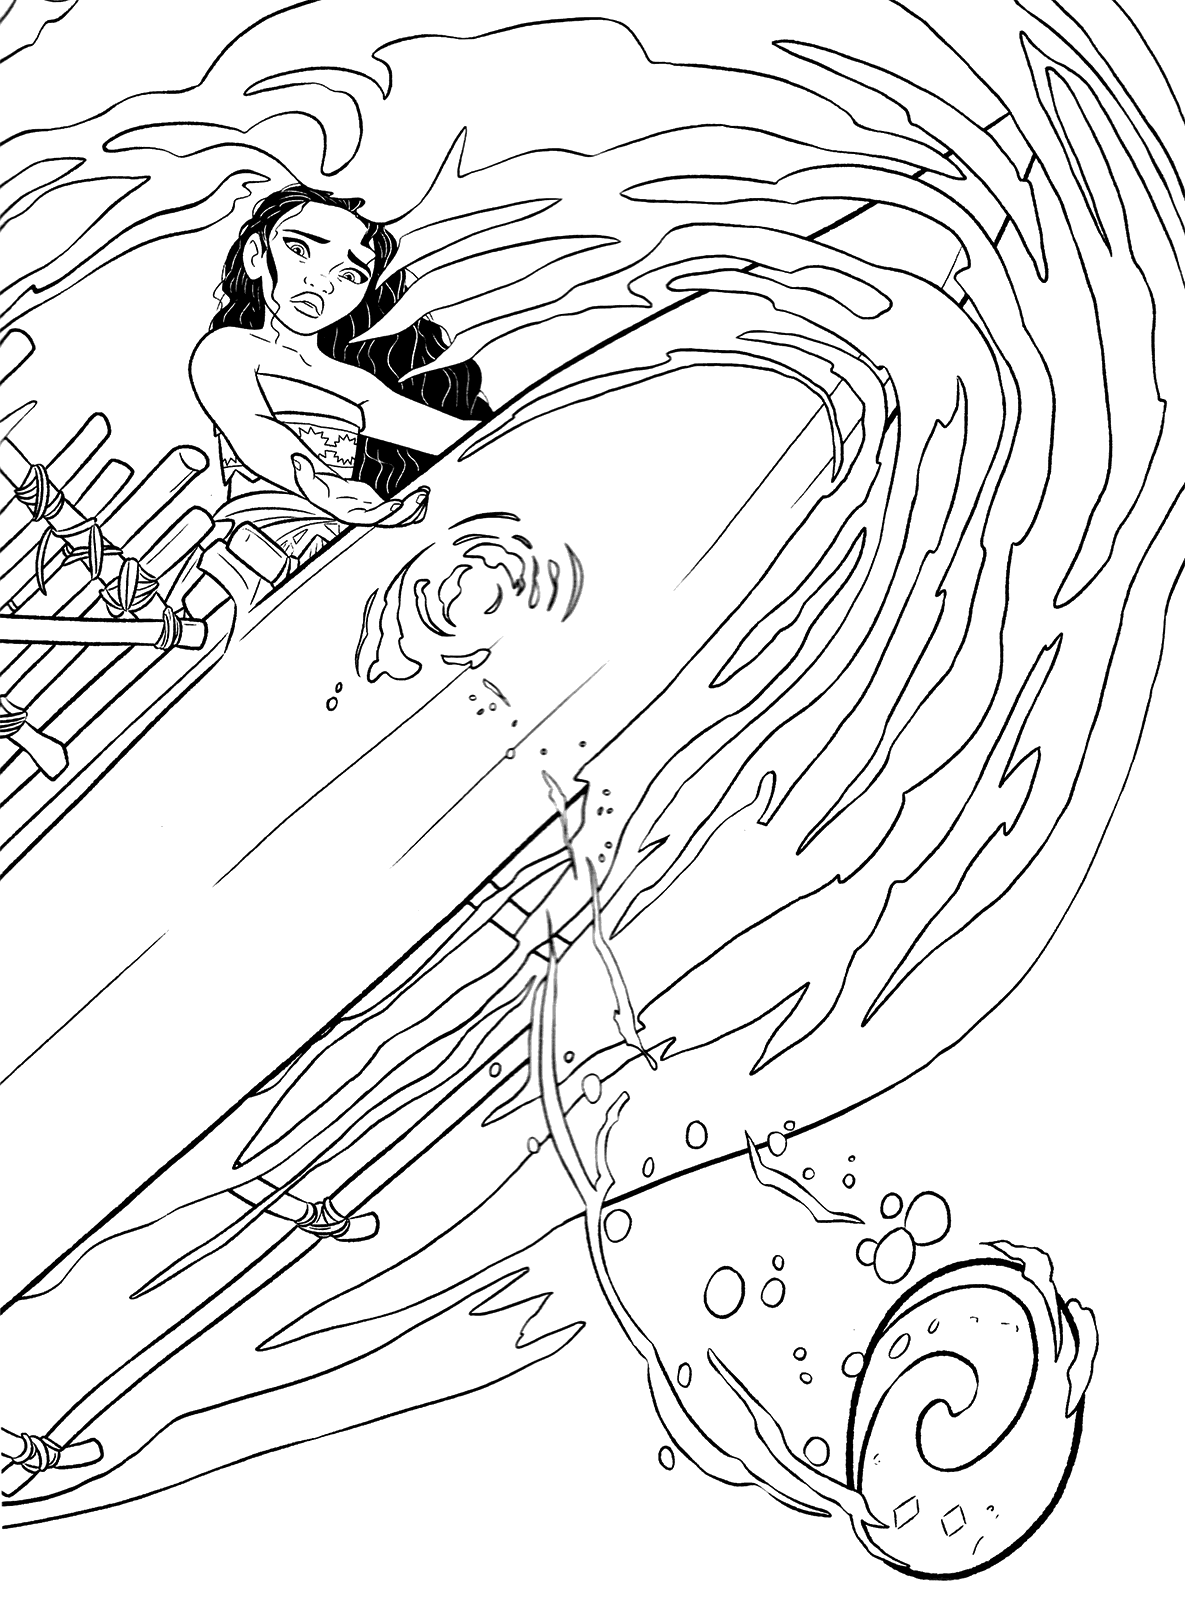 Heart of Te Fiti - Moana Coloring Pages